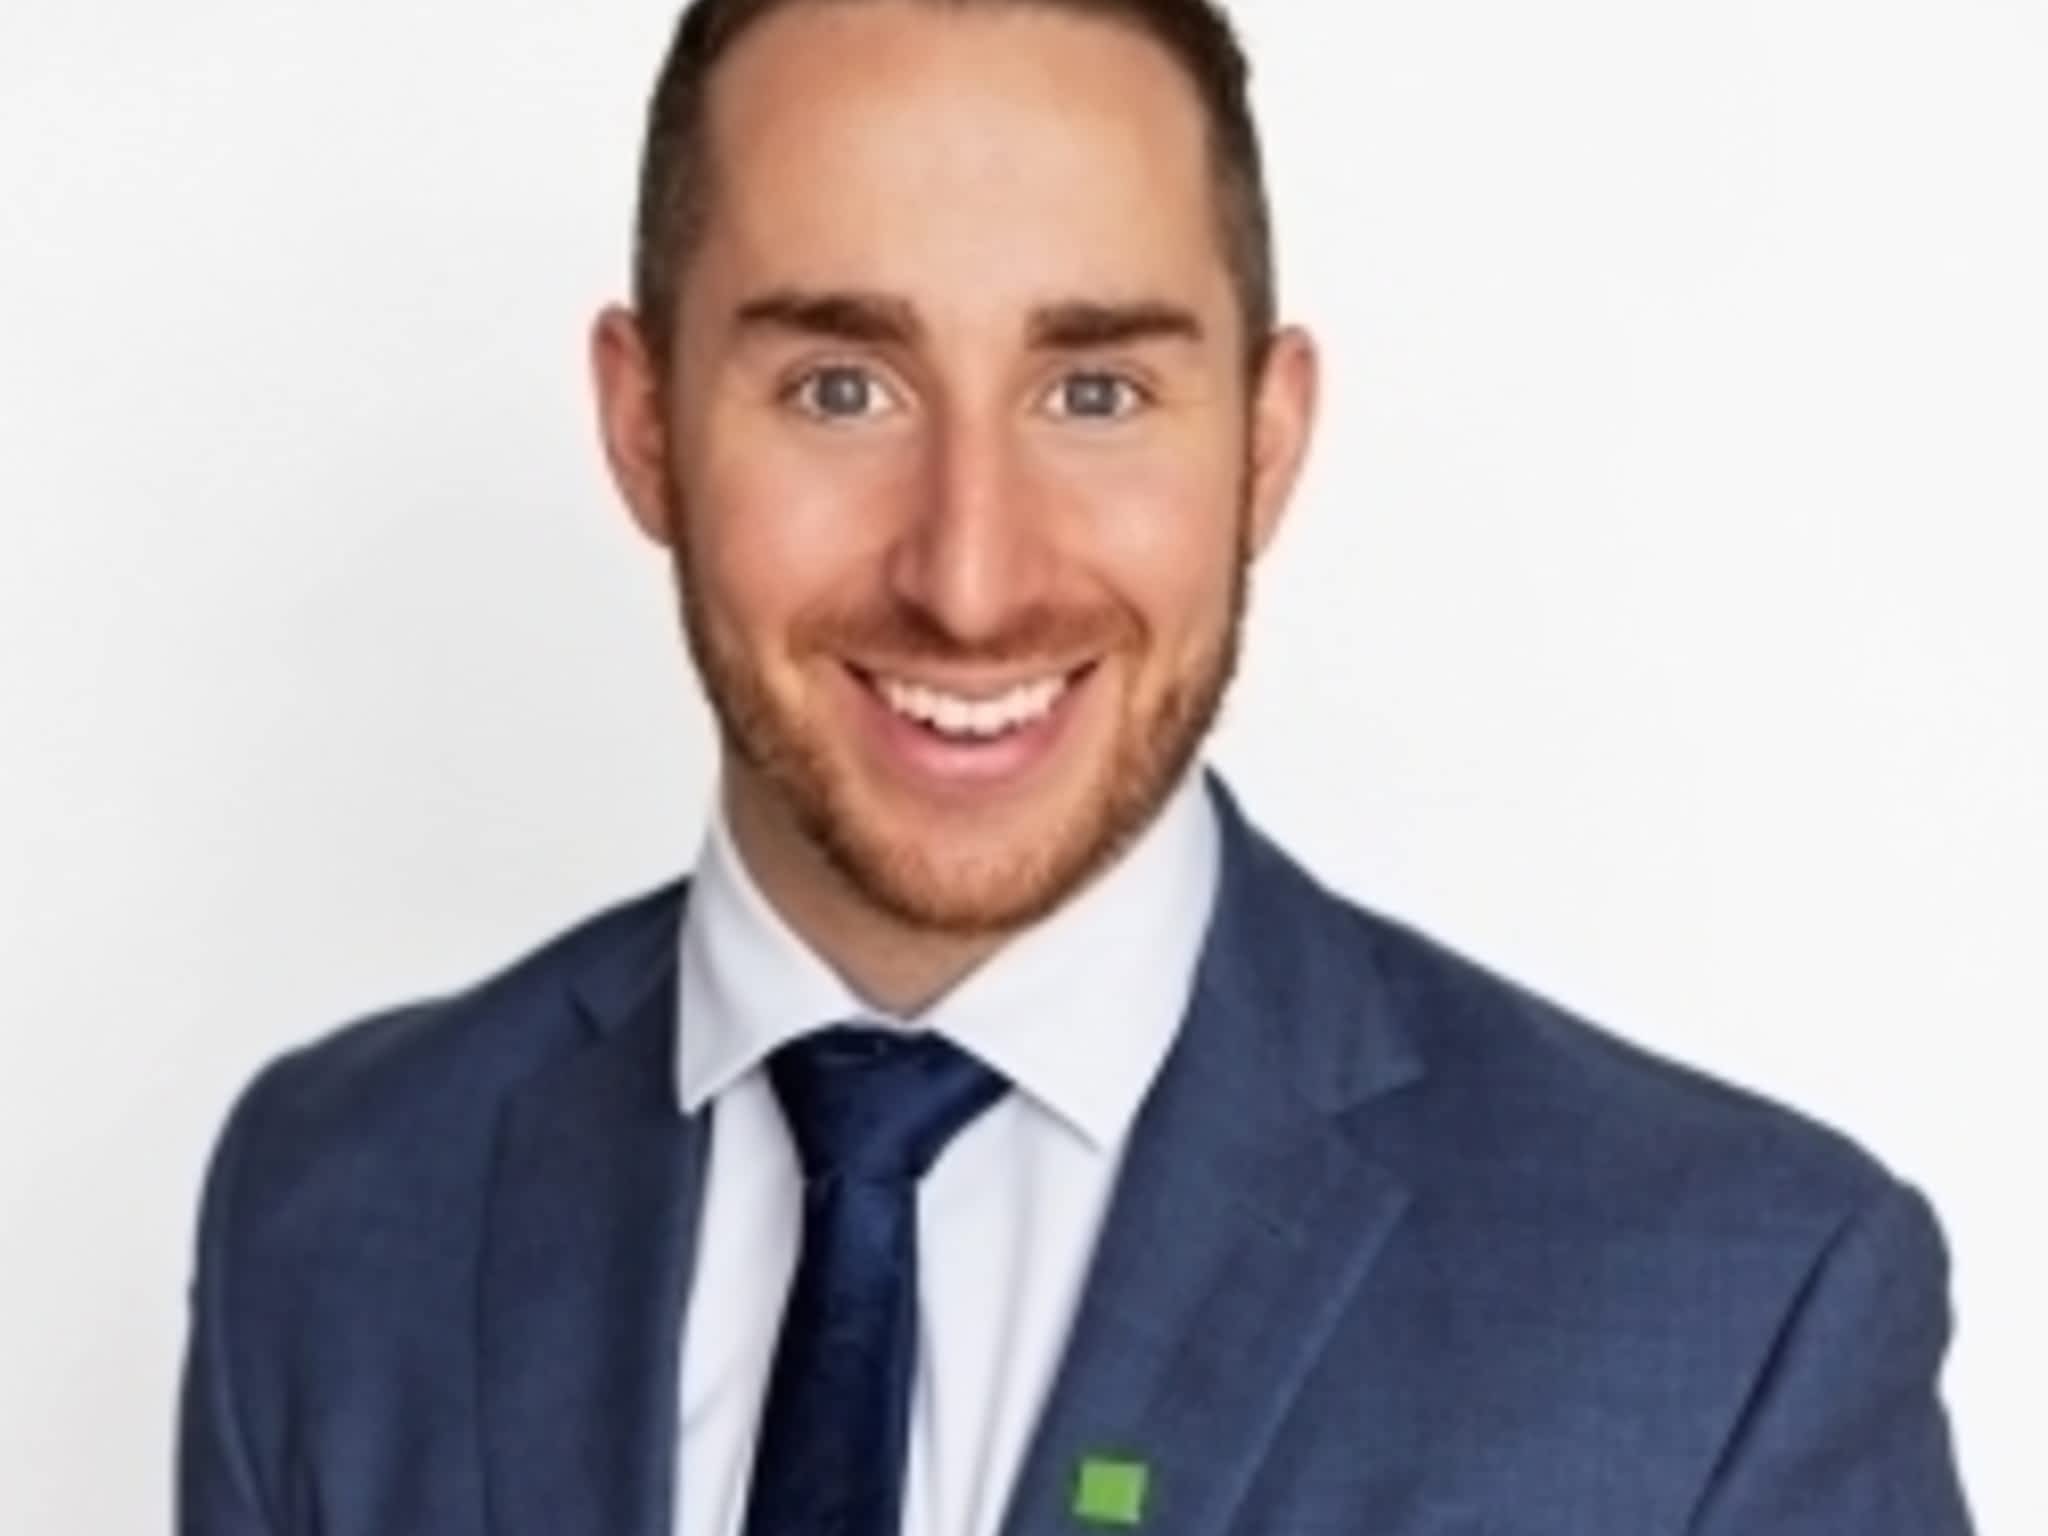 photo Cody O'Reilly - TD Investment Specialist - Closed